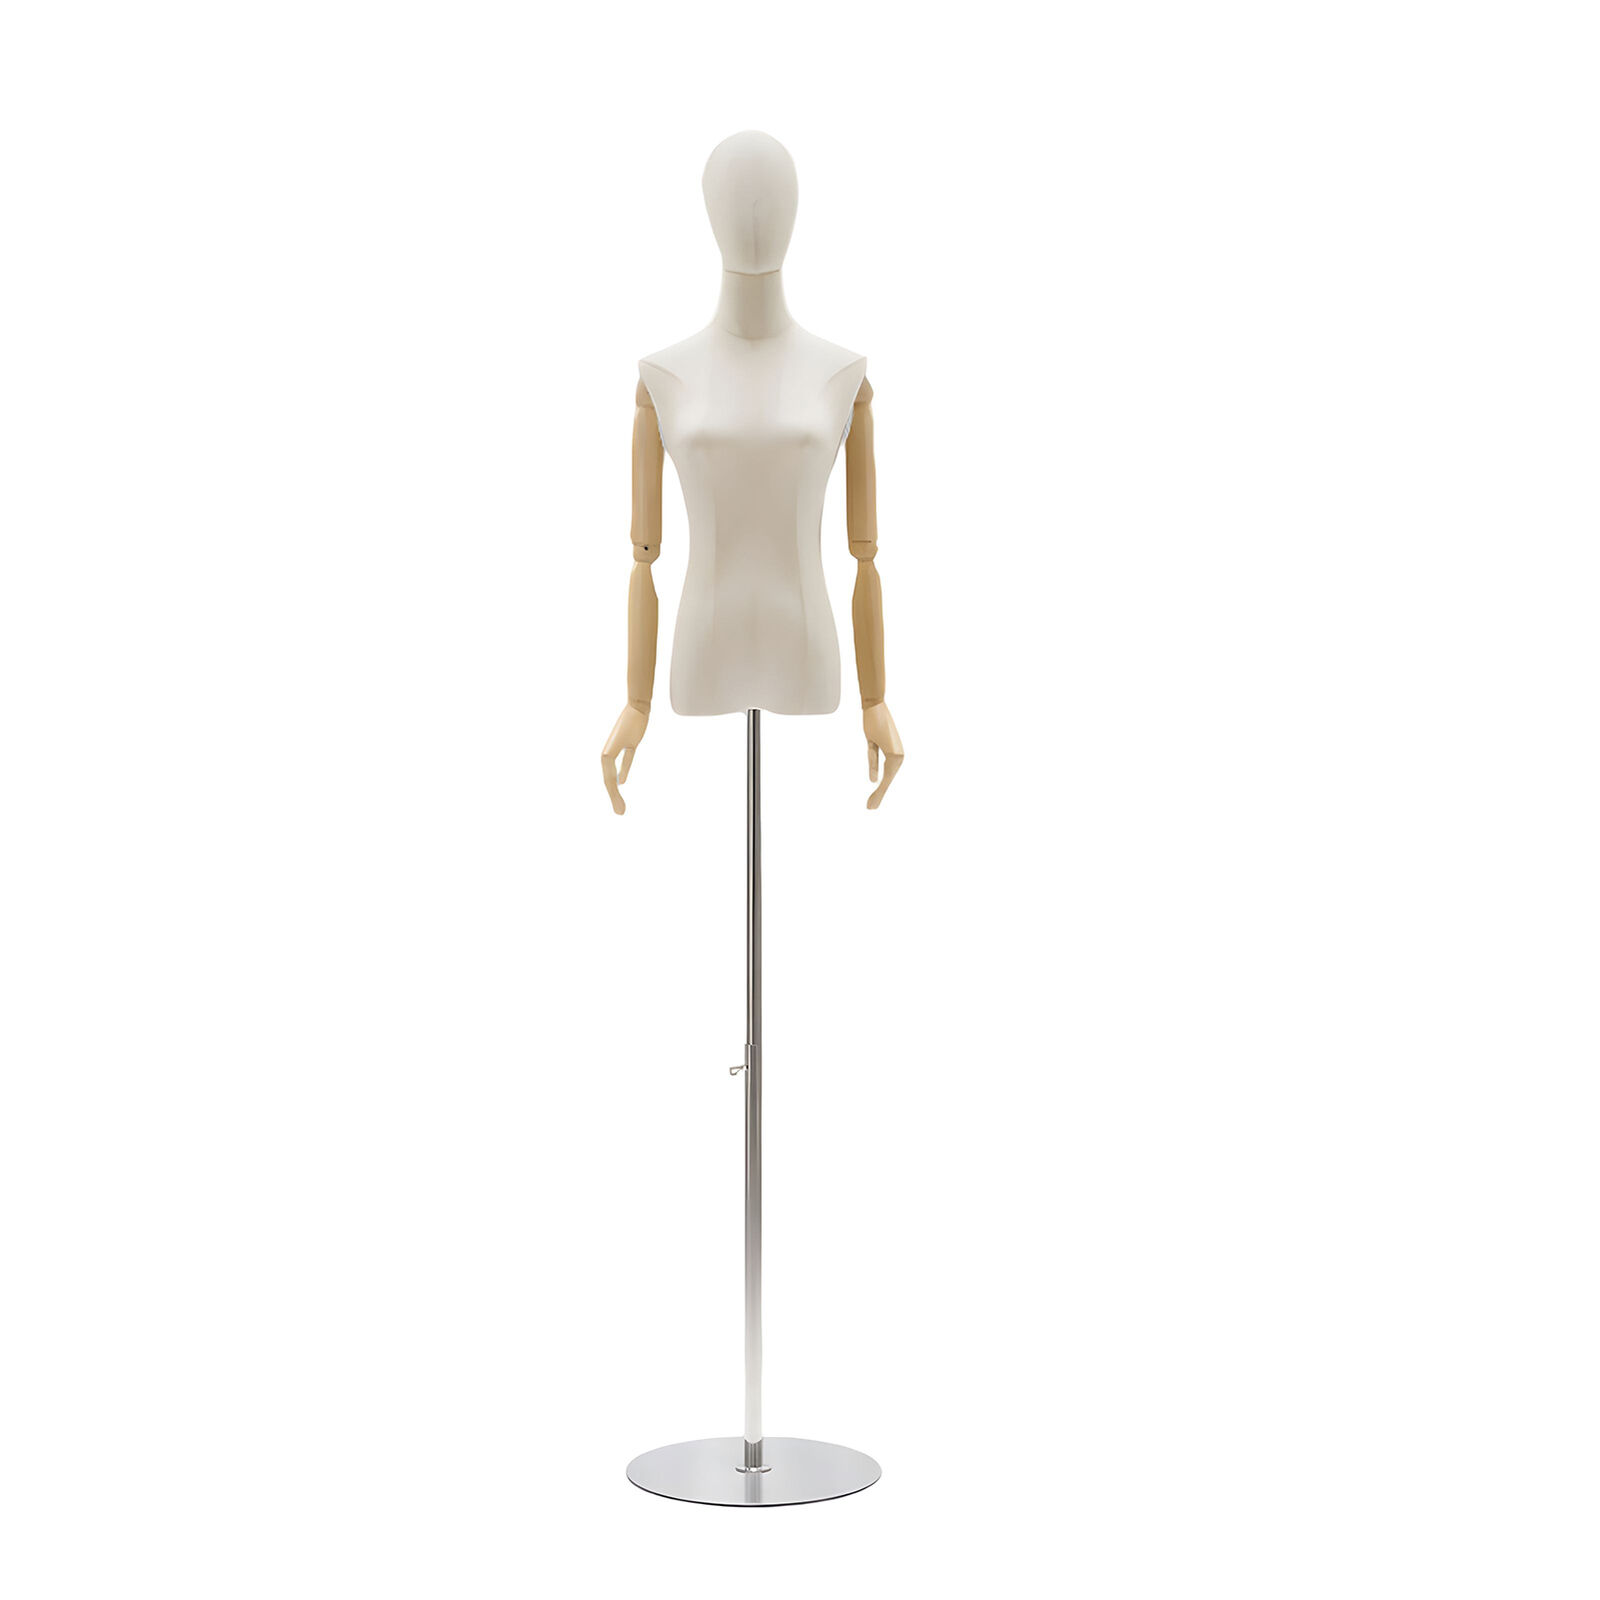 Dress Mannequin for Sewing Female Torso with Head Portable Display Mannequin